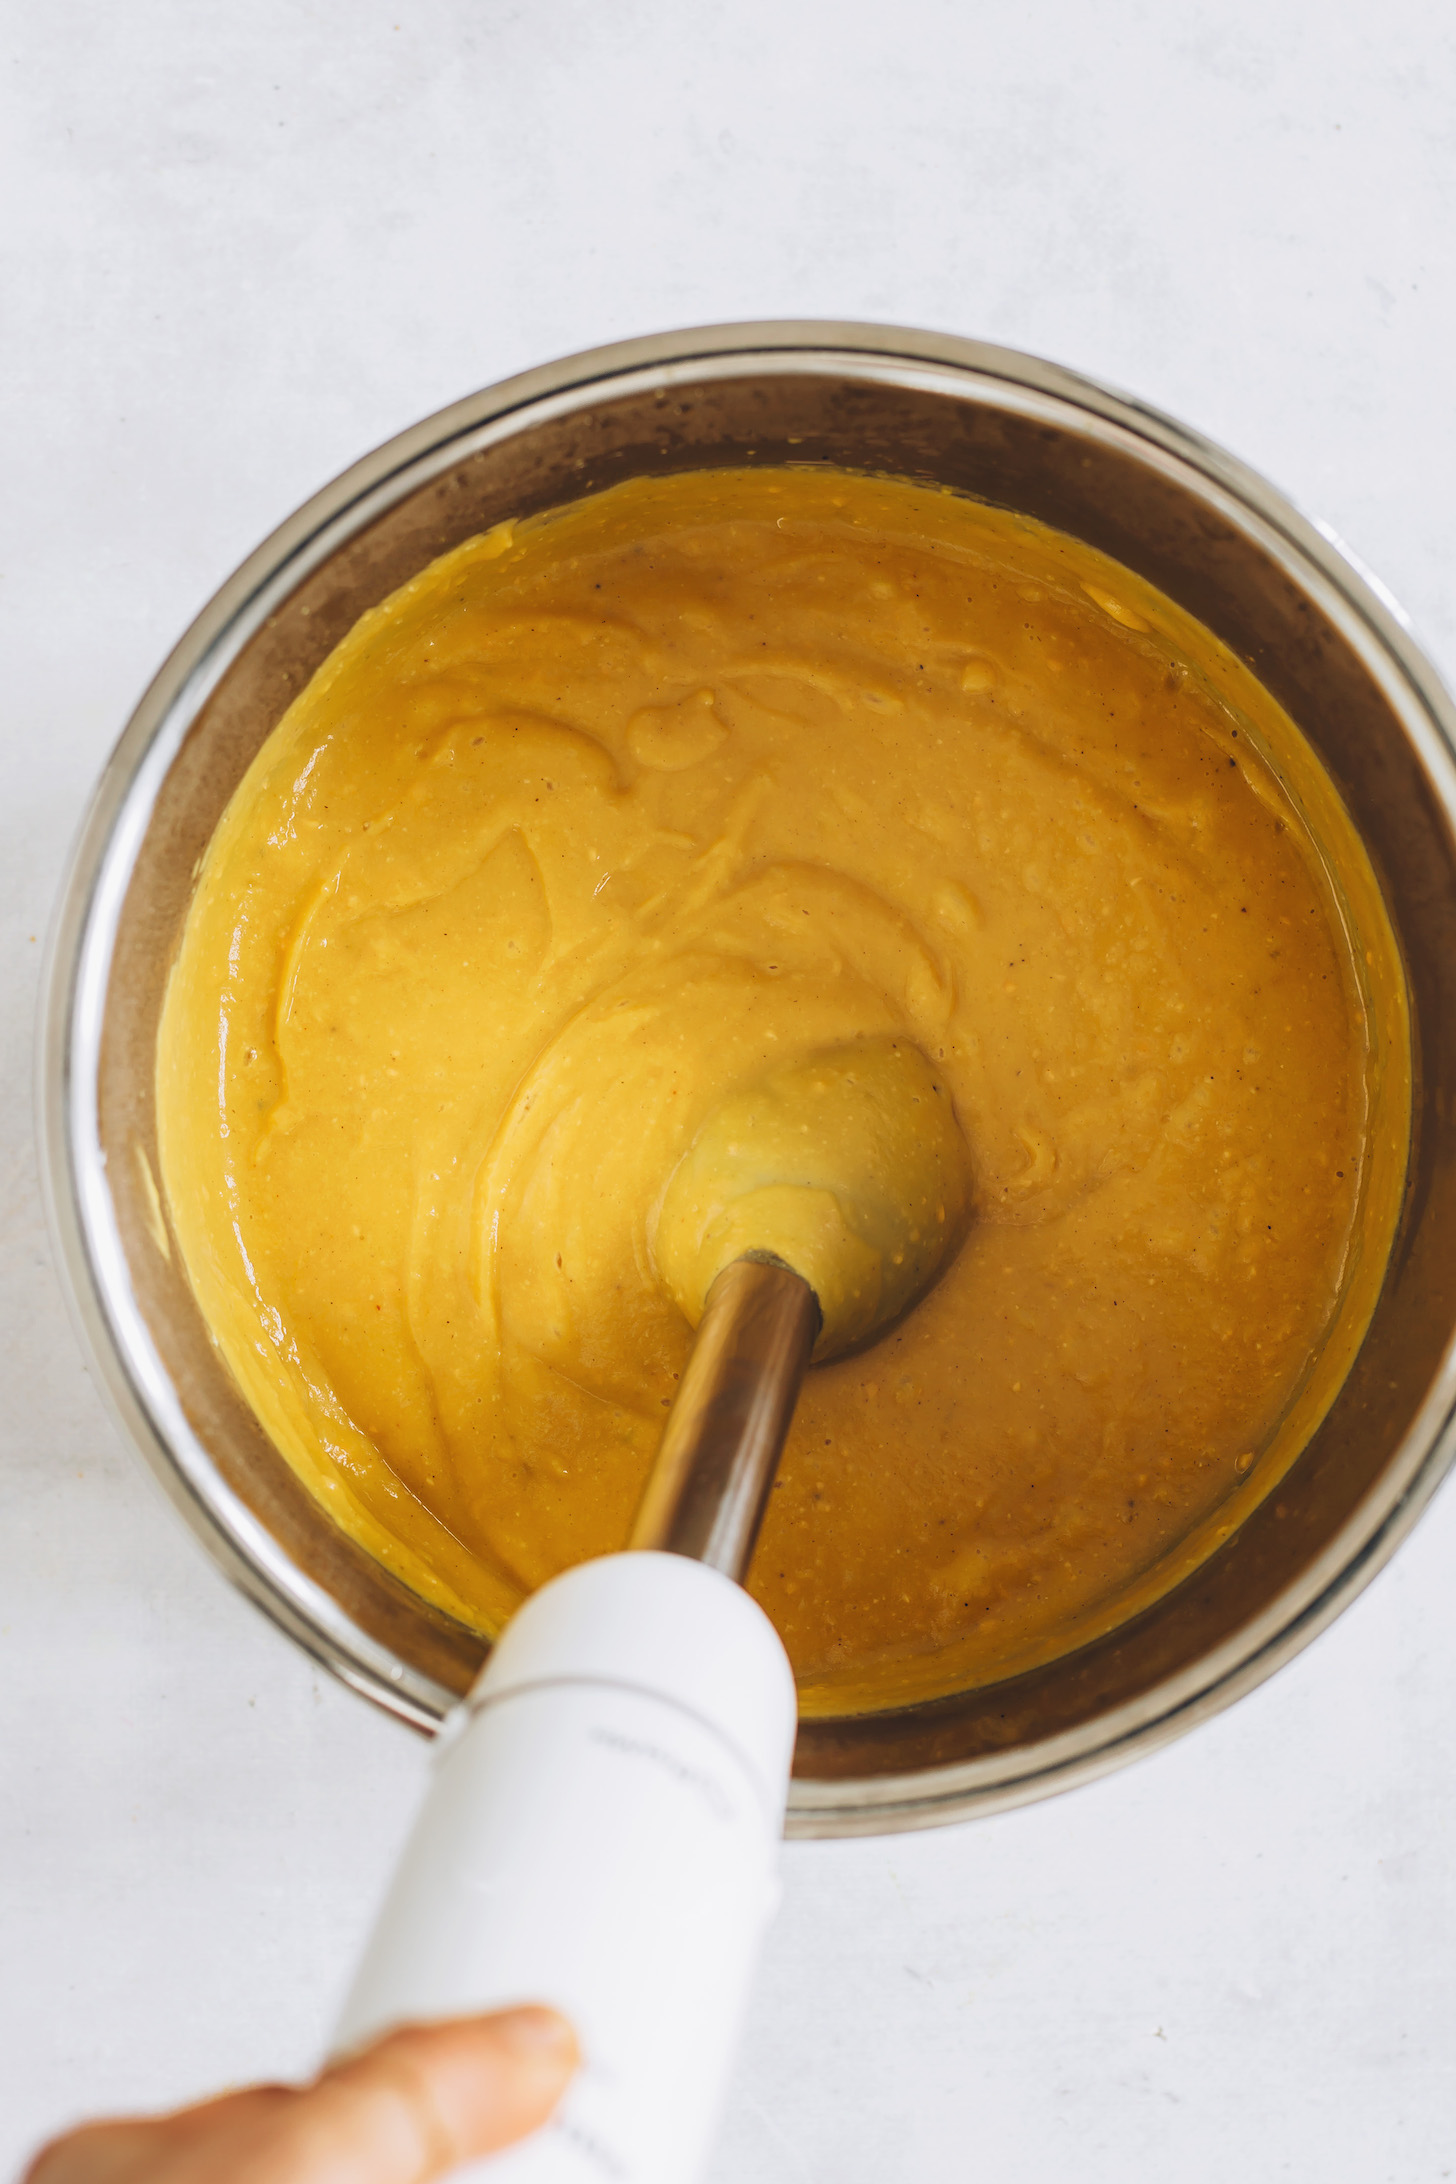 Puréeing creamy sweet potato red lentil soup with an immersion blender